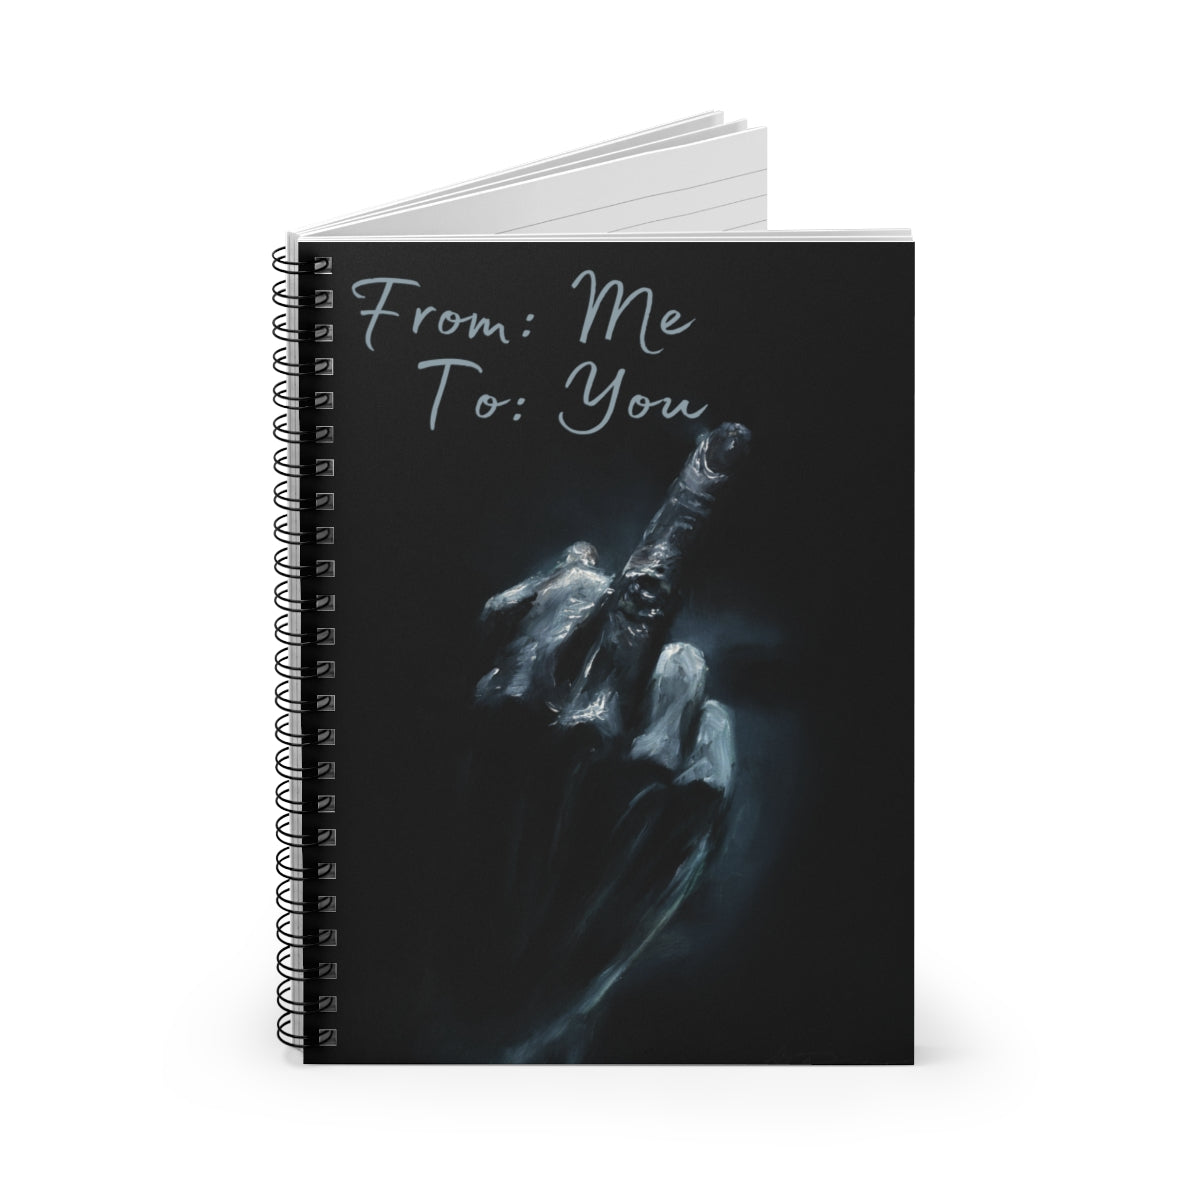 Breakup gift, From Me To You,  Middle Finger Notebook, Middle Finger Artwork, Journal,  Fun Notebook, White Elephant, Gift, Gag Gift Journal